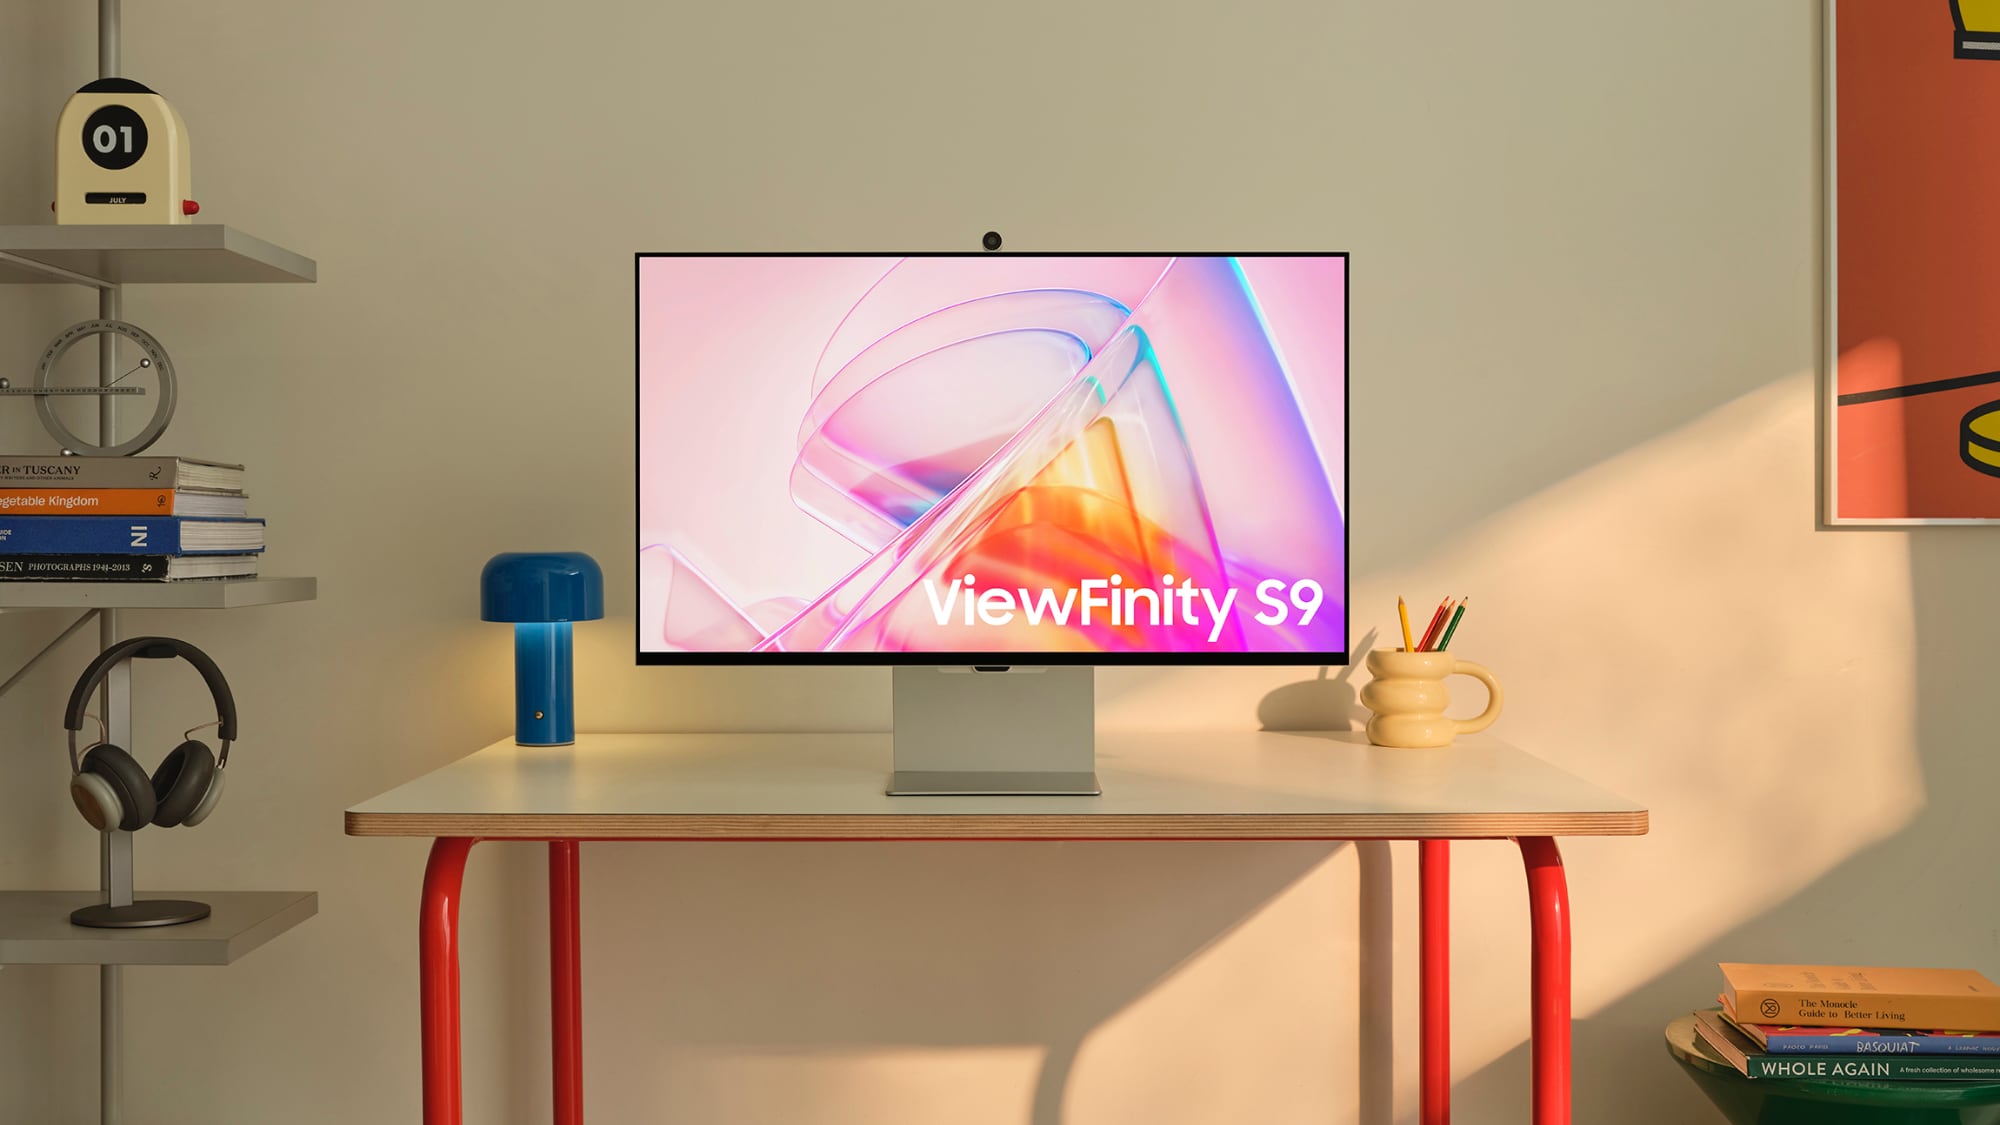 Samsung's ViewFinity S9 5K Smart Monitor Hits All-Time Low $999 Price ($600 Off)